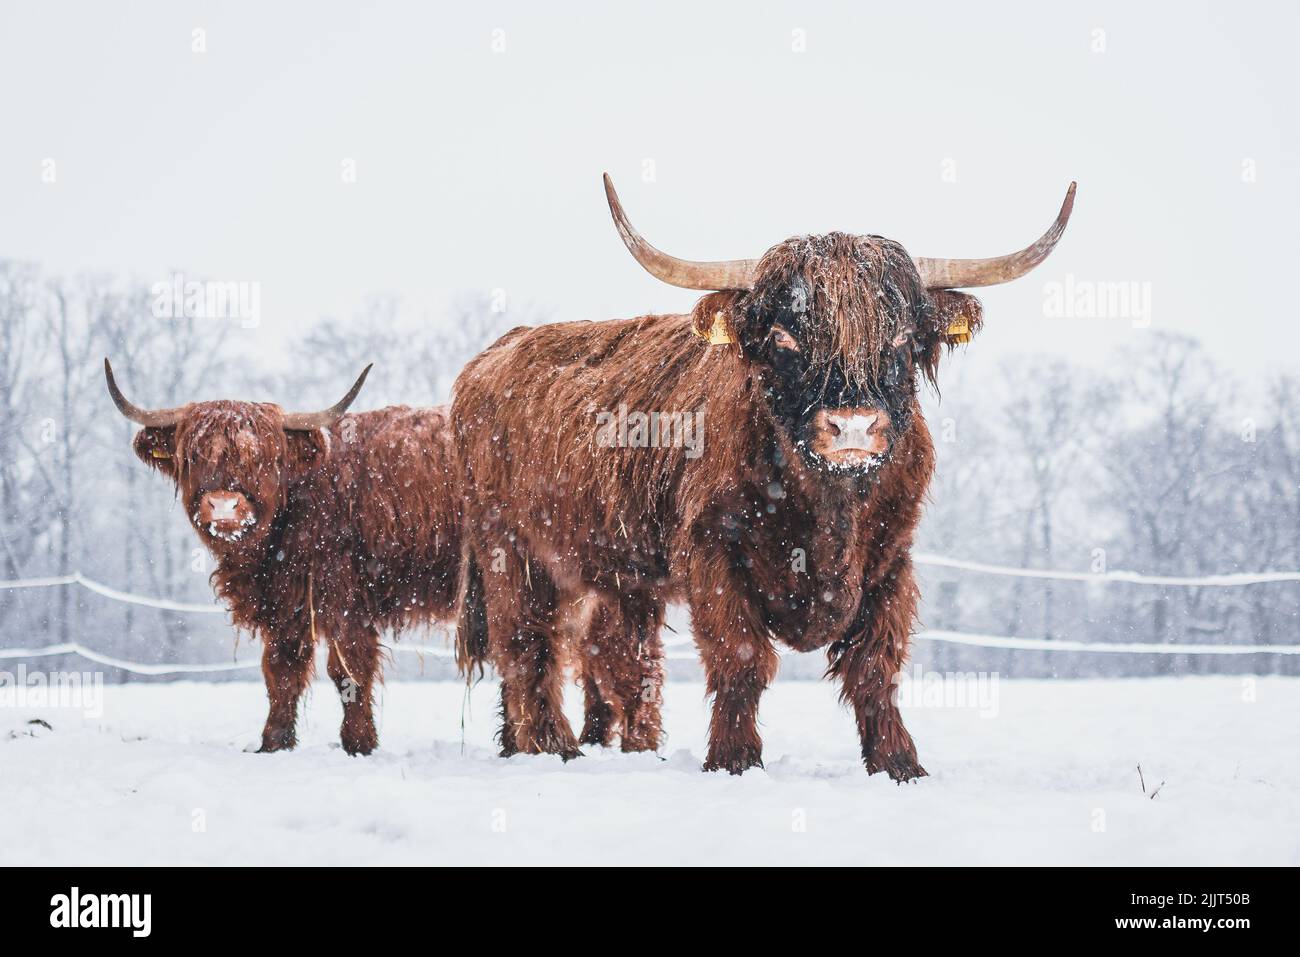 A natural view of Scottish highland cattle on the snow during winter Stock Photo